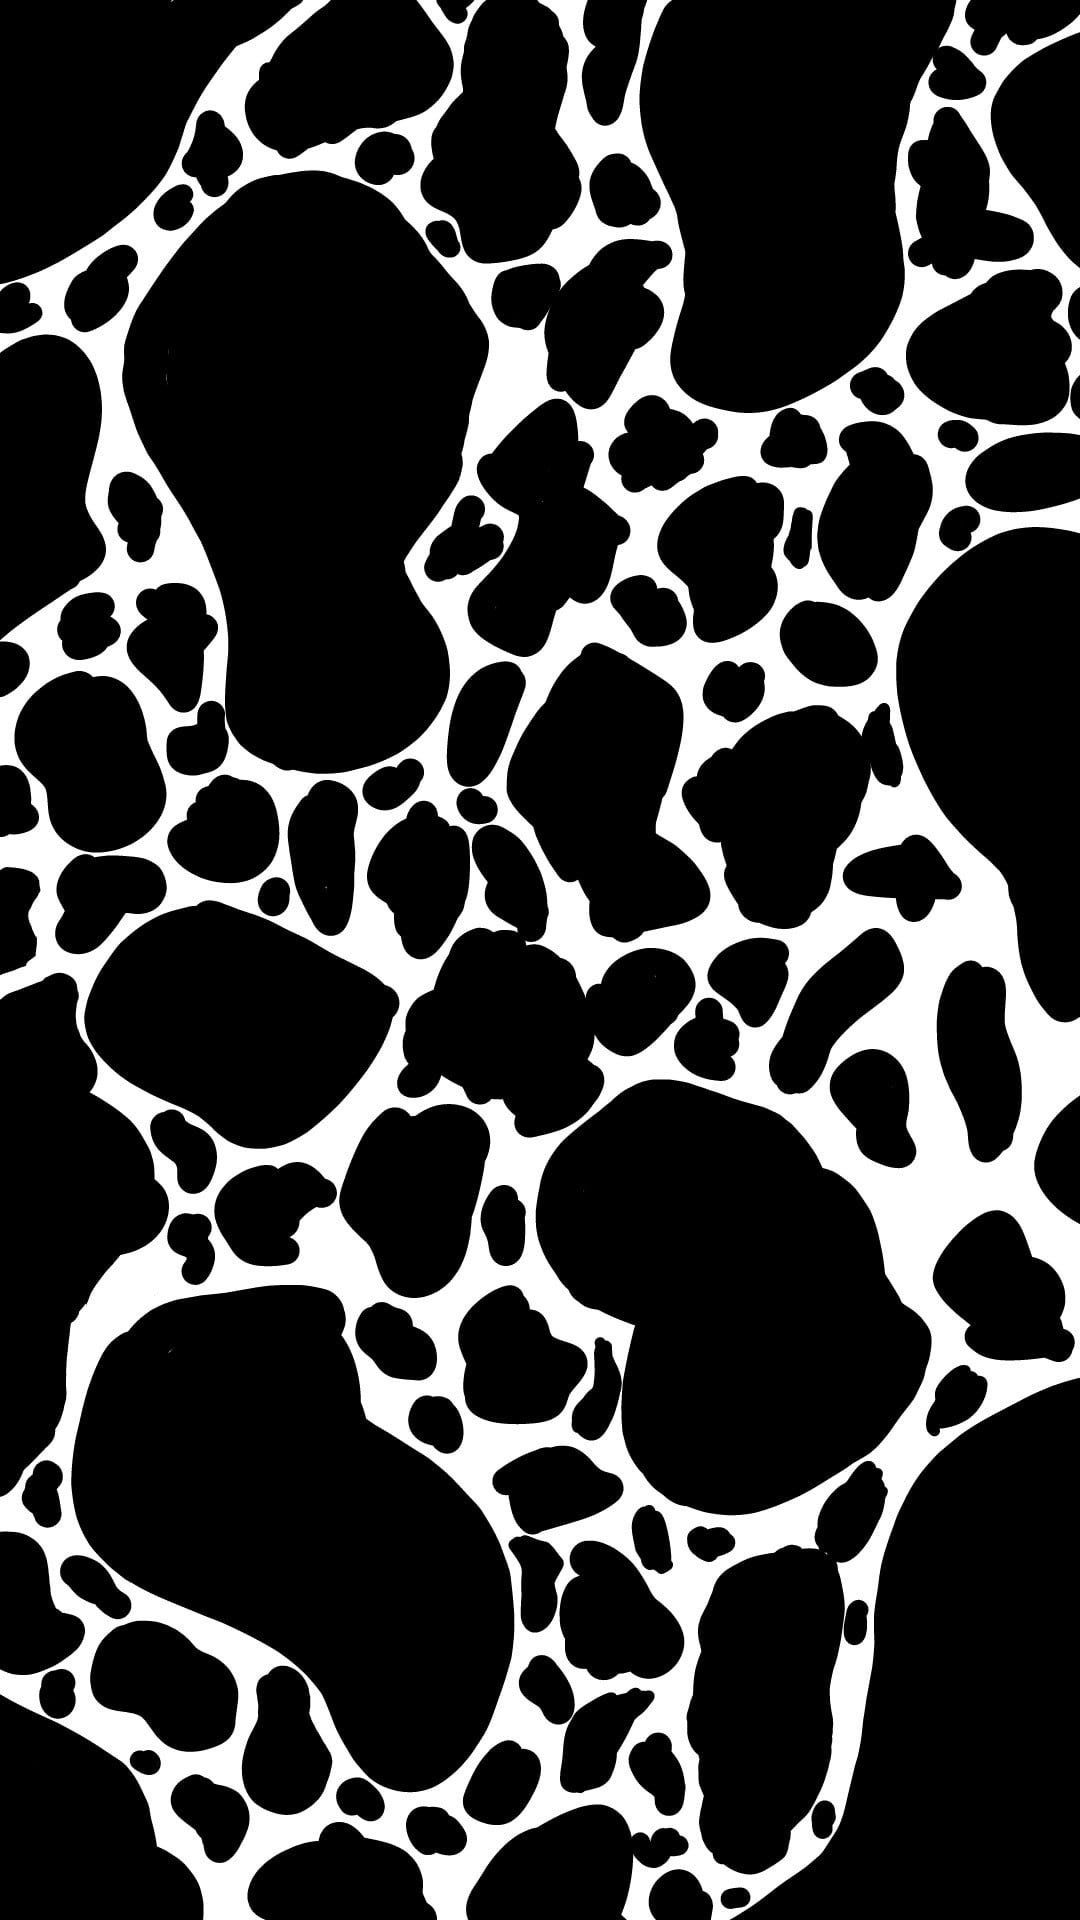 A black and white cow pattern - Cow, black glitch